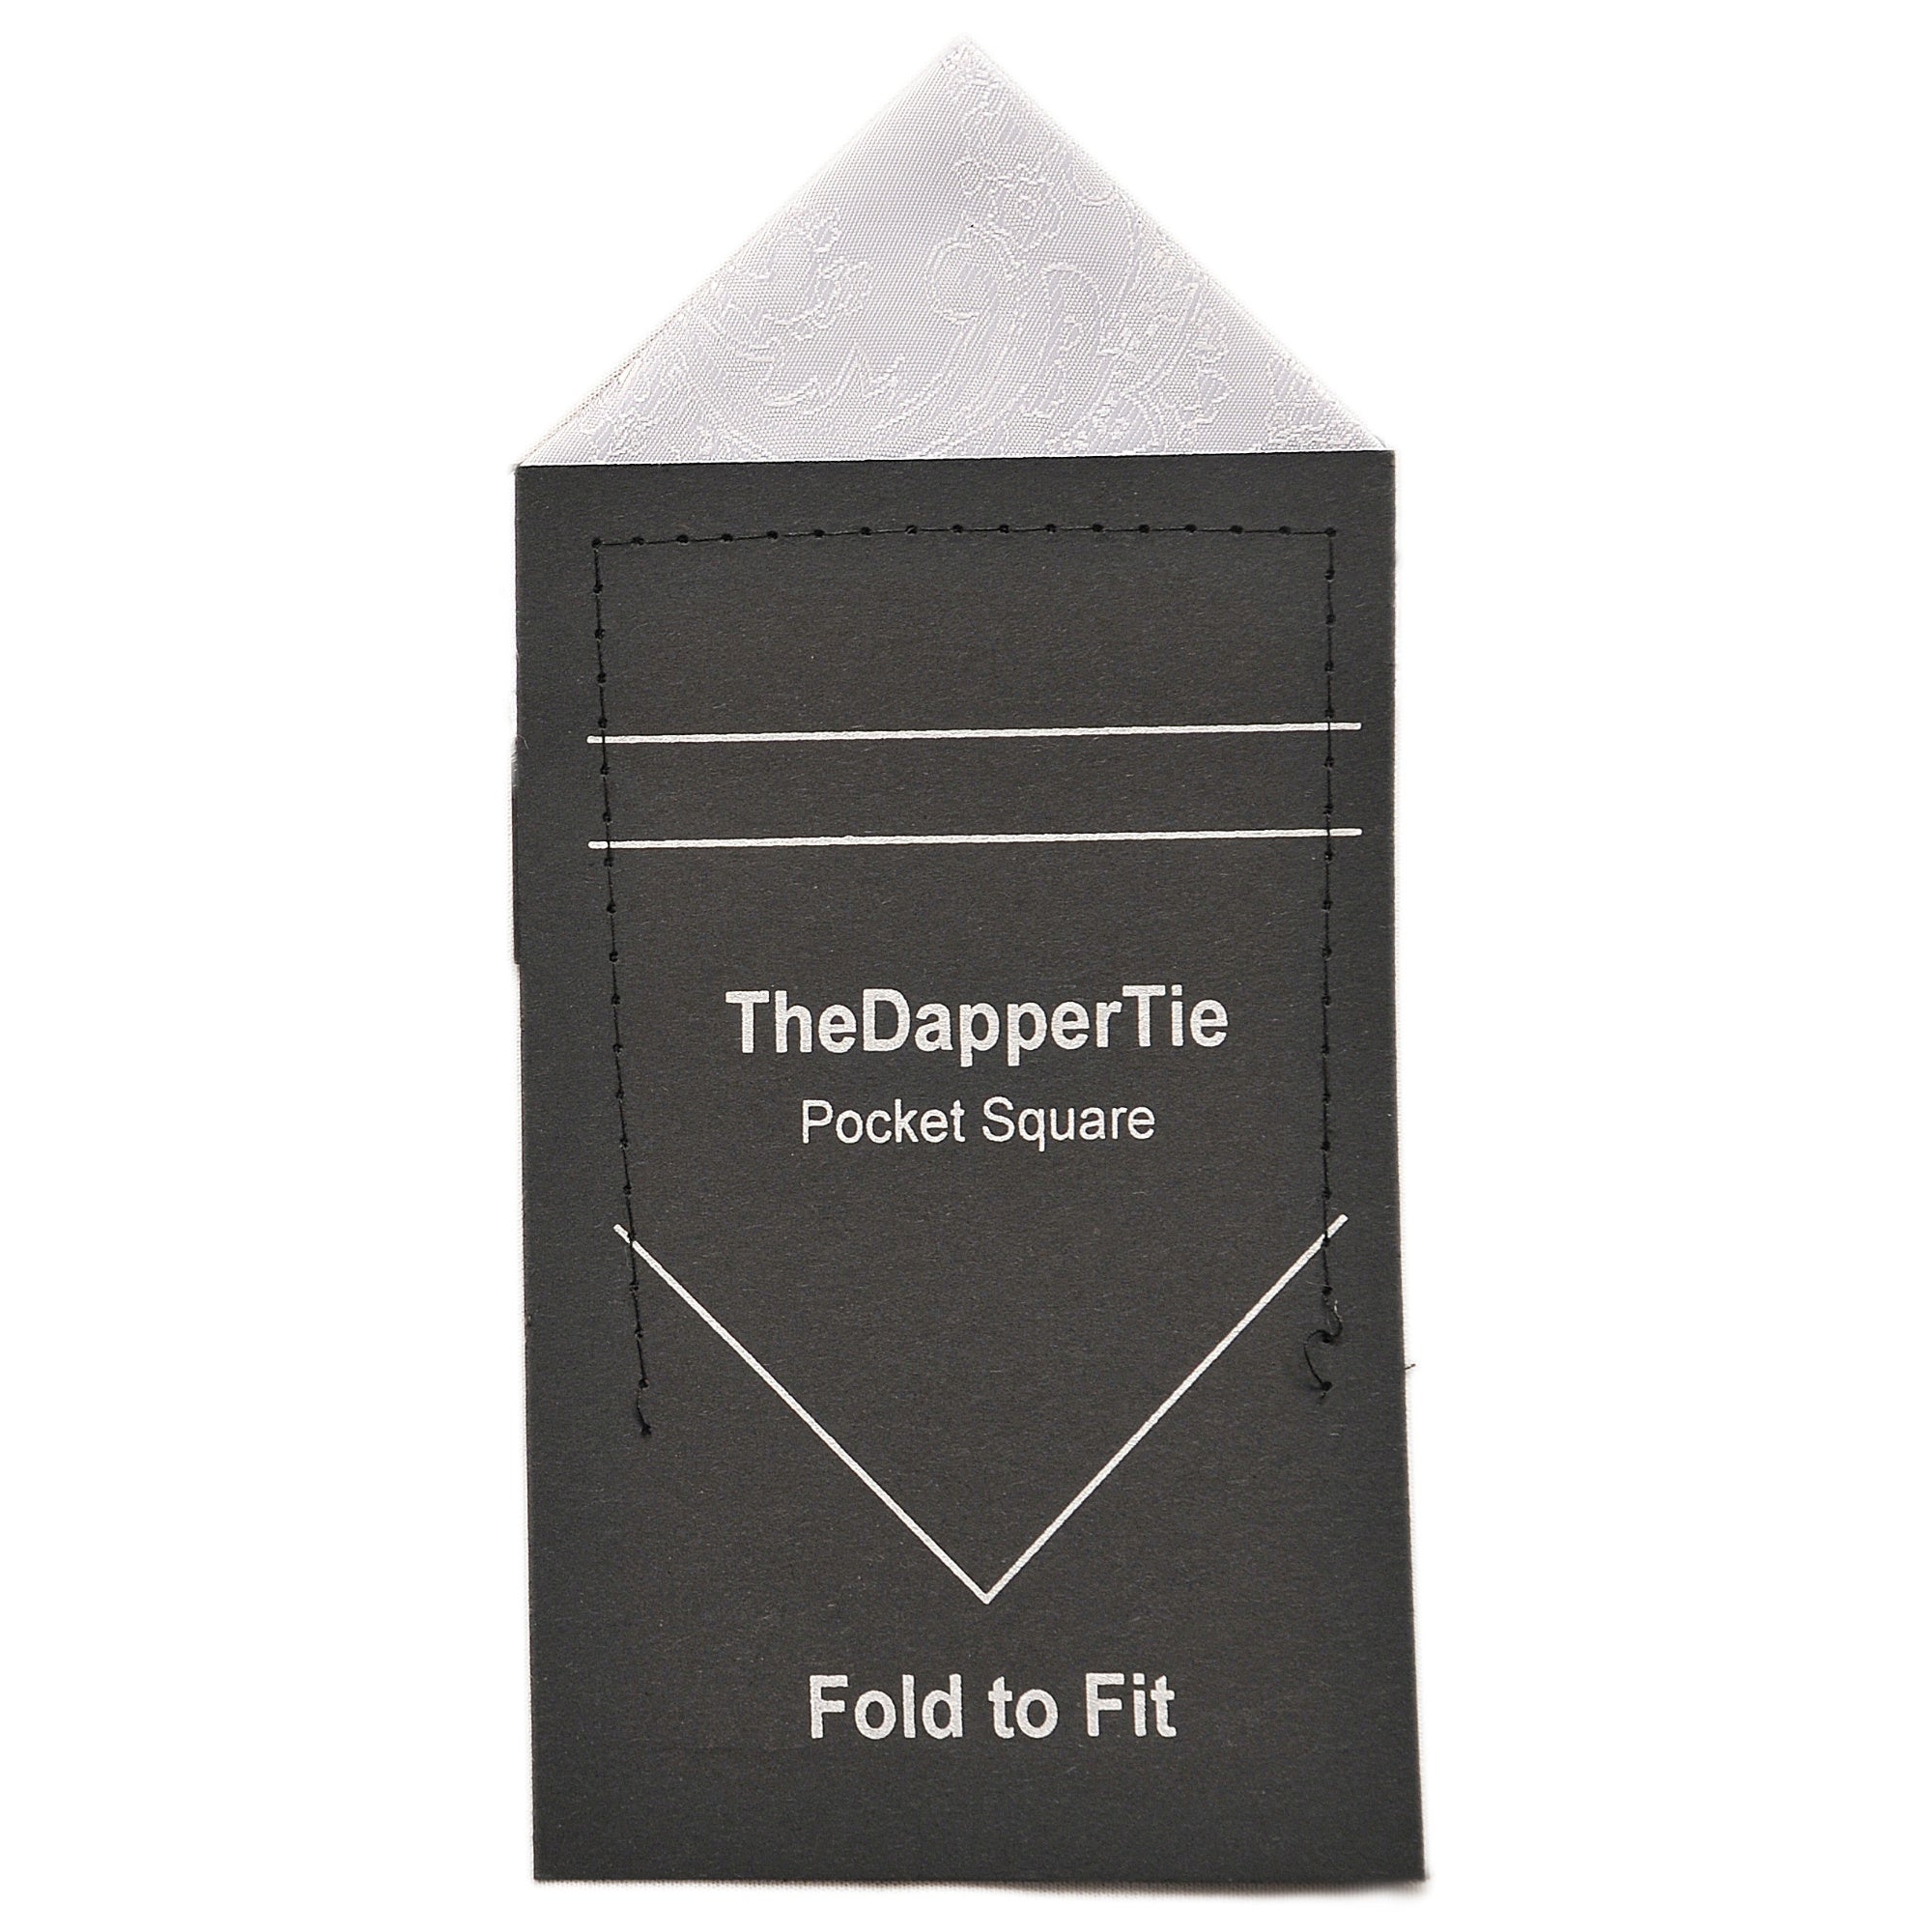 New Men's Paisley Triangle Pre Folded Pocket Square on Card Prefolded Pocket Squares TheDapperTie White Regular 